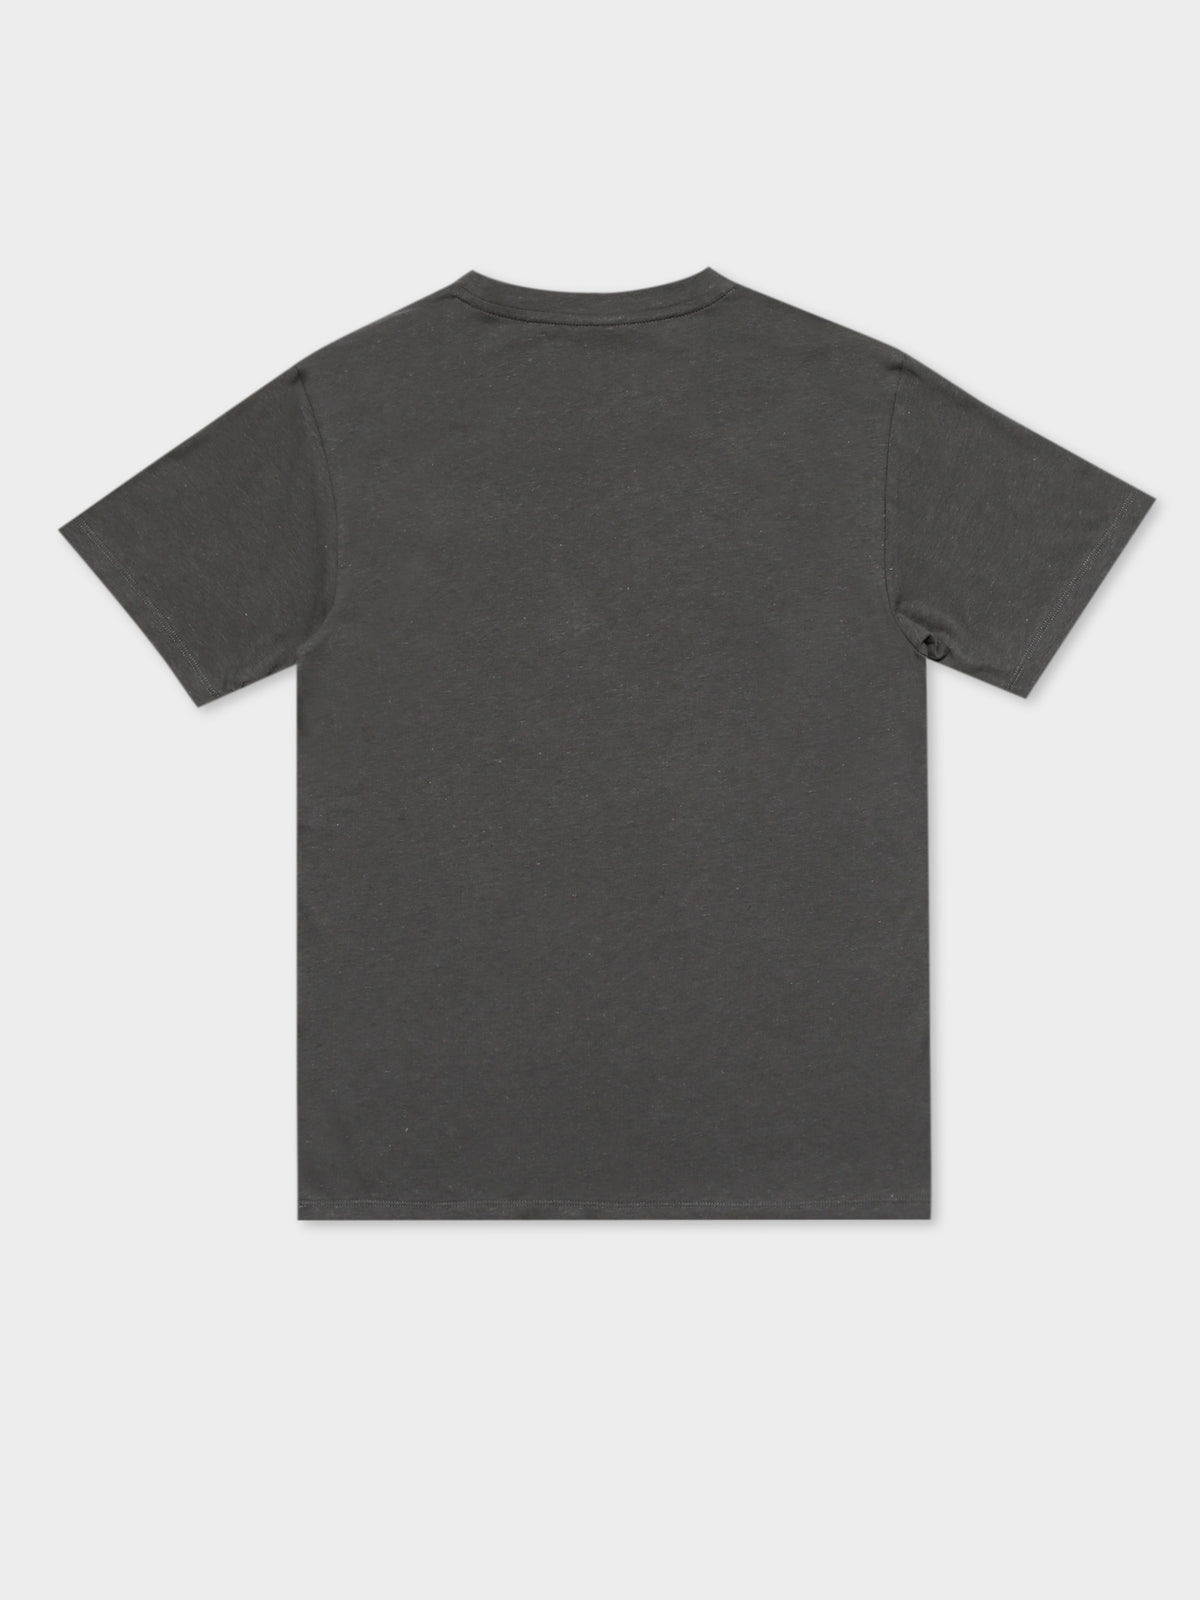 Combat T-Shirt in Charcoal